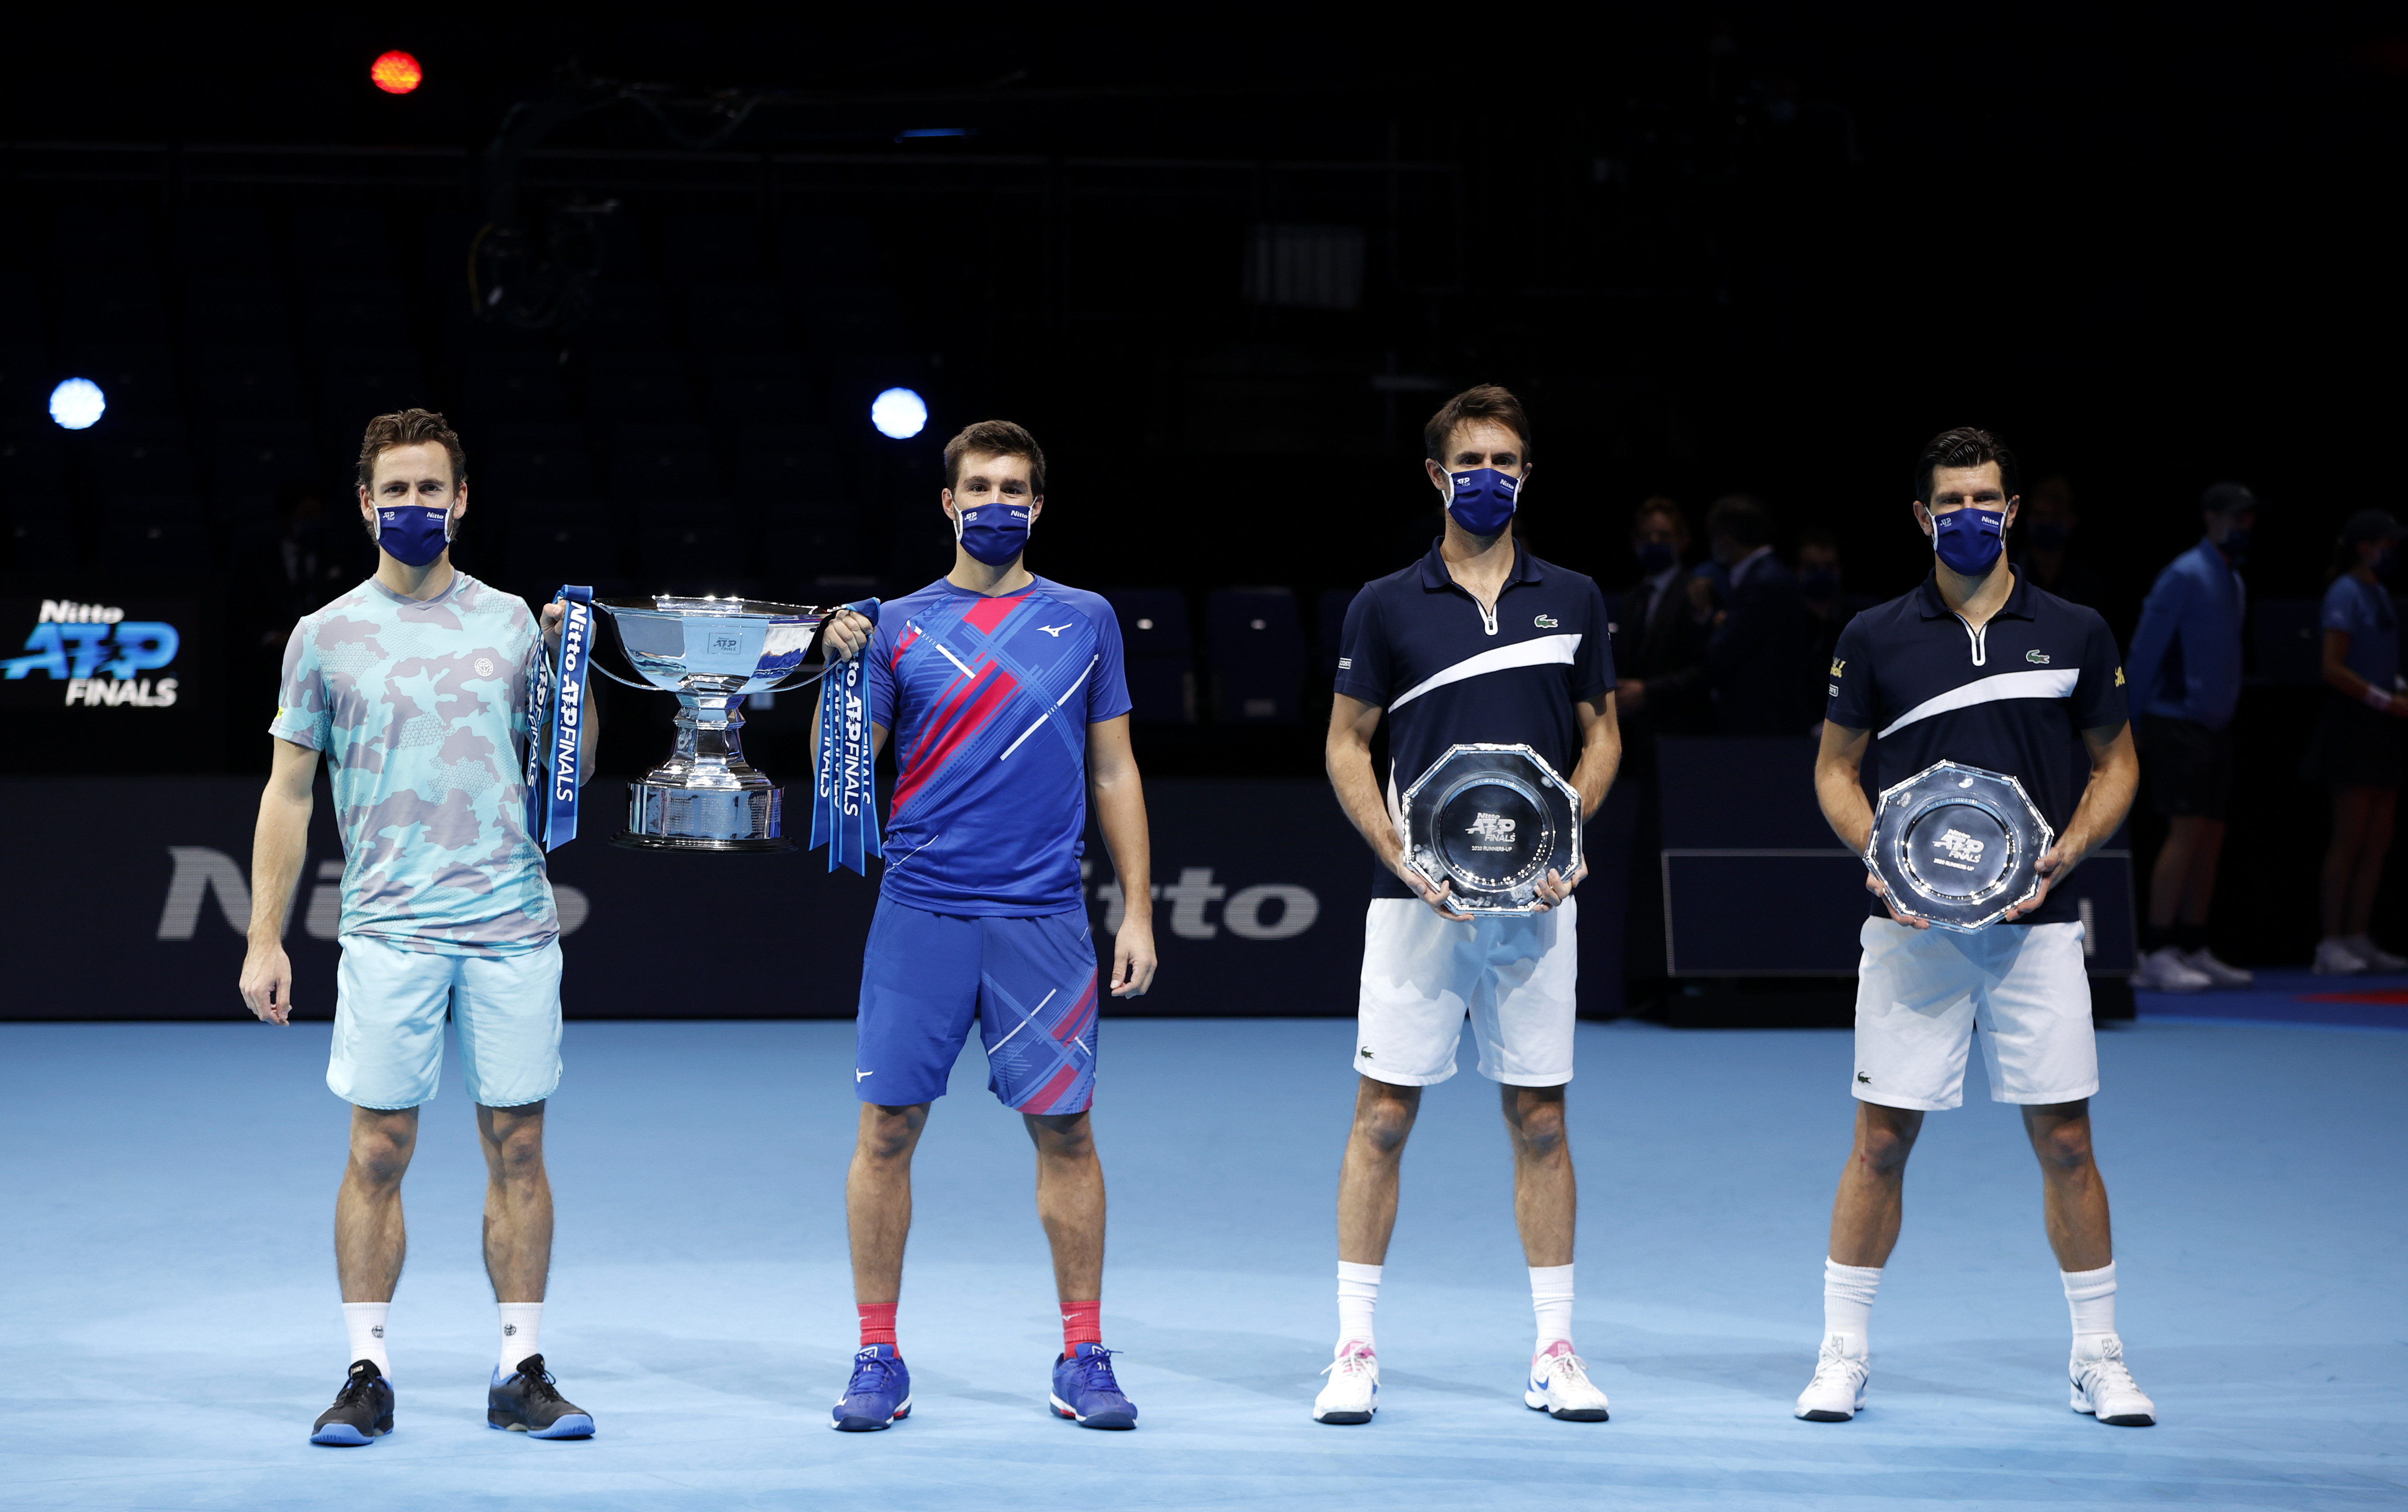 A Letter to ATP doubles players Life in the After Bryan Brothers era